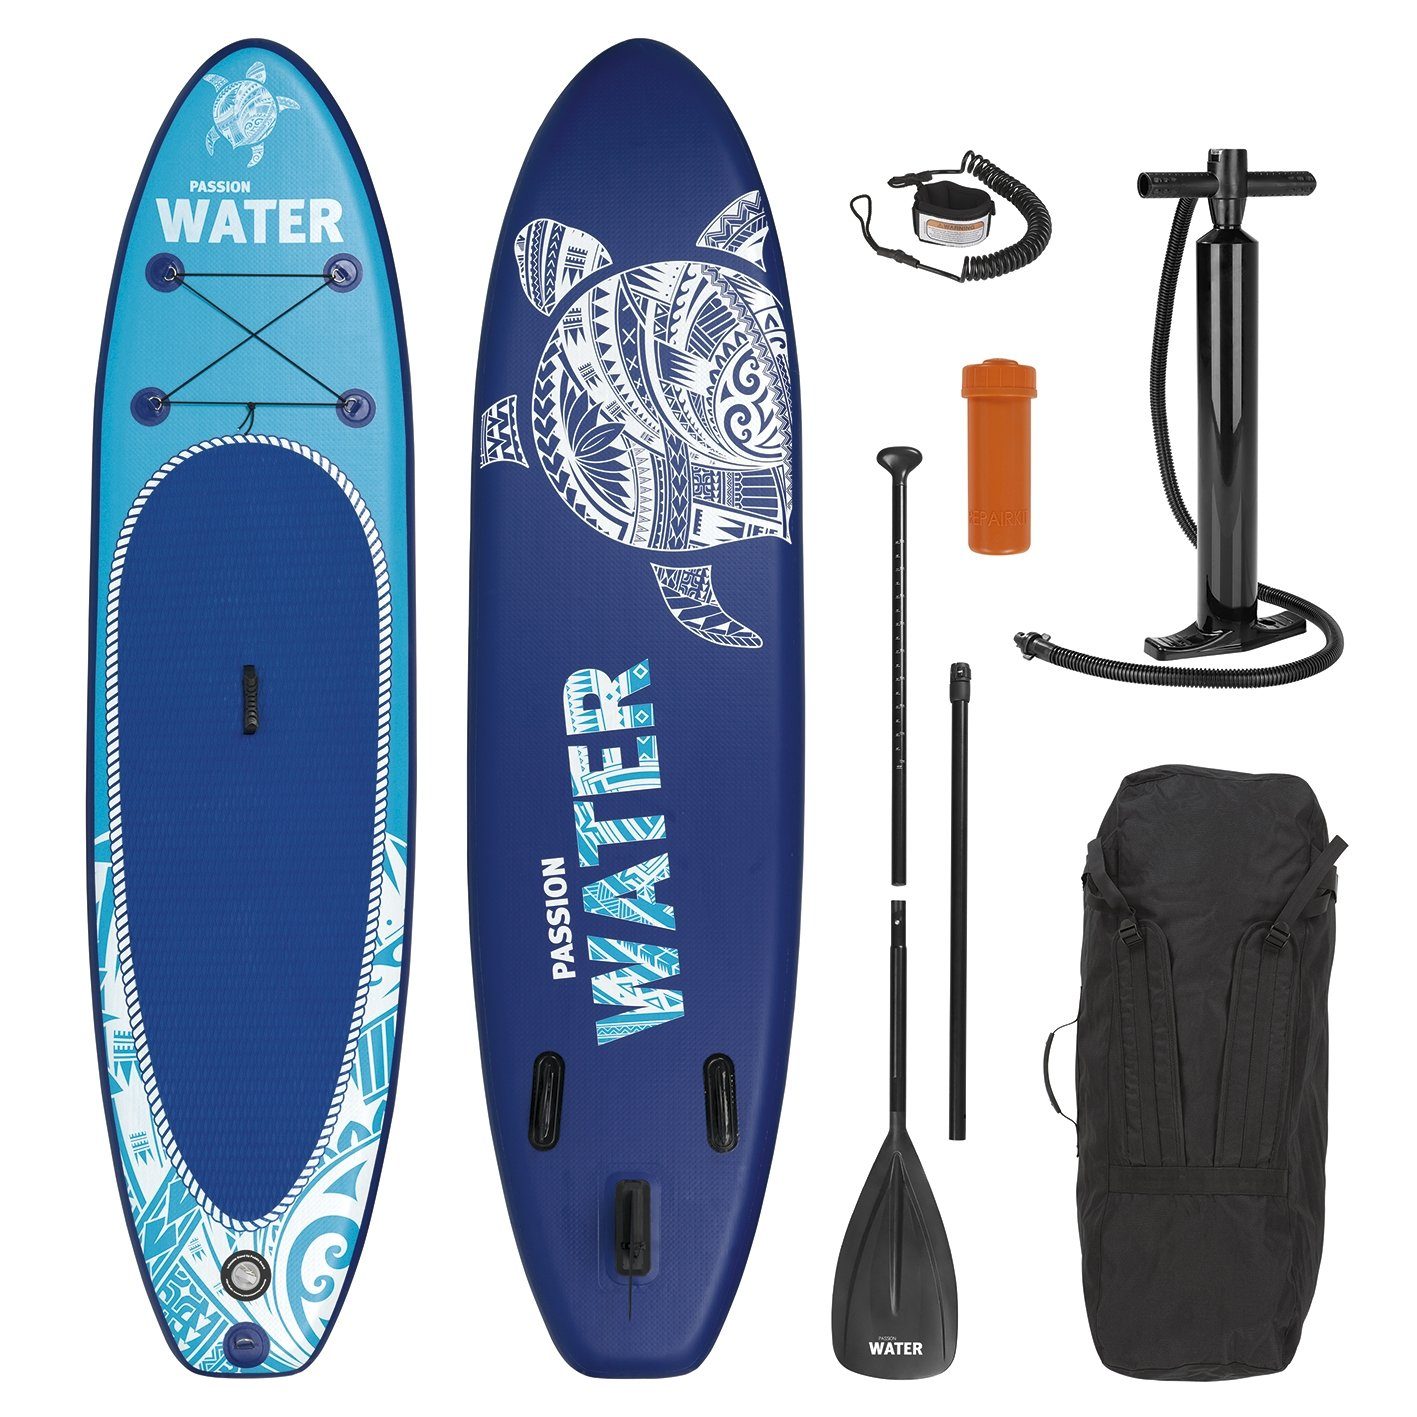 MAXXMEE Inflatable SUP-Board, 300 cm, inkl. Paddel SUP up Set 110kg, Stand-Up Paddle Board Komplett Stand Board Paddle-Board Paddling blau/türkis